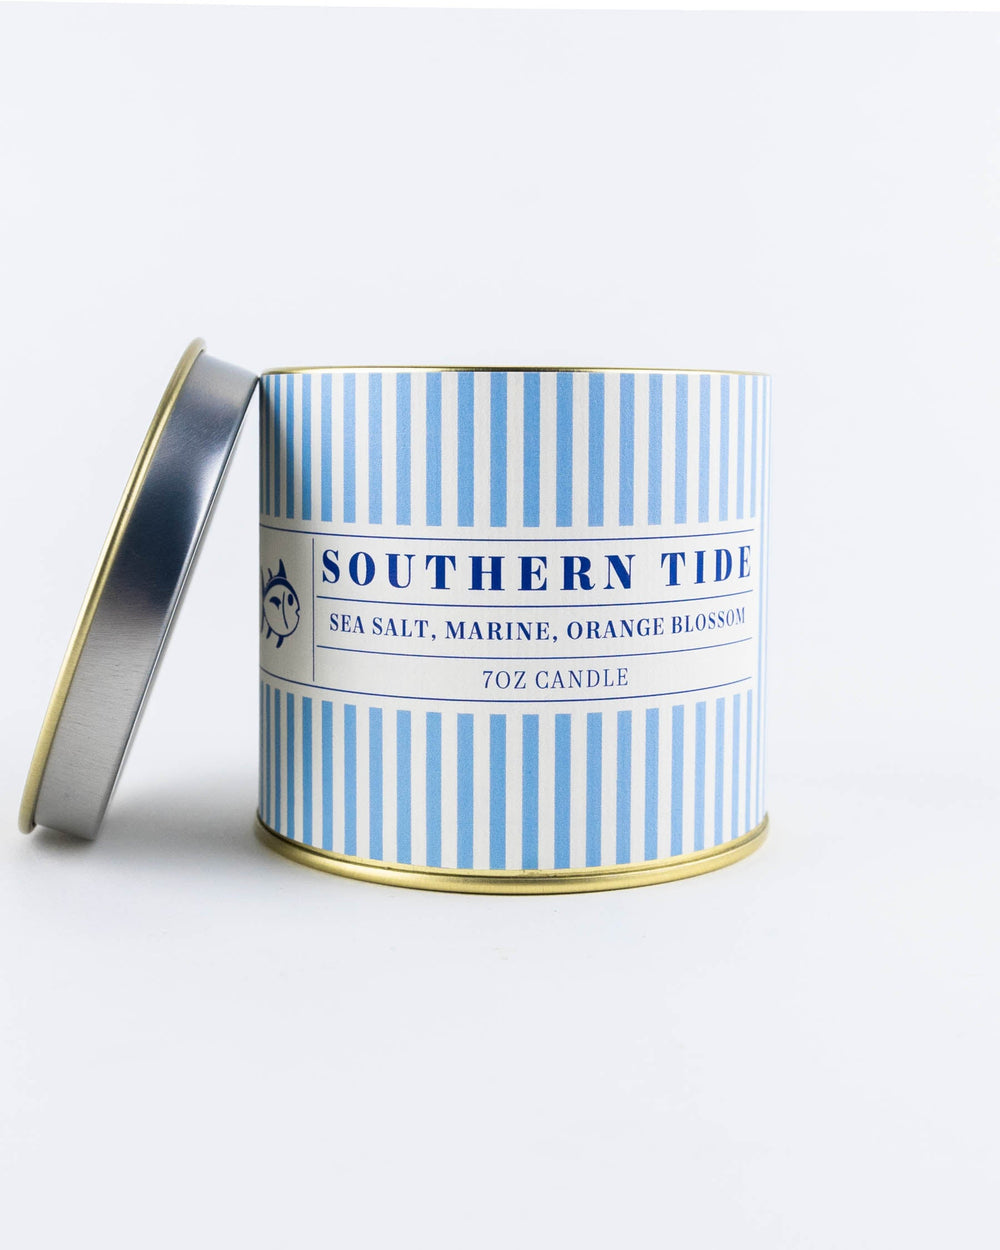 The front open view of the Southern Tide Southern Tide Candlefish Candle by Southern Tide - Blue